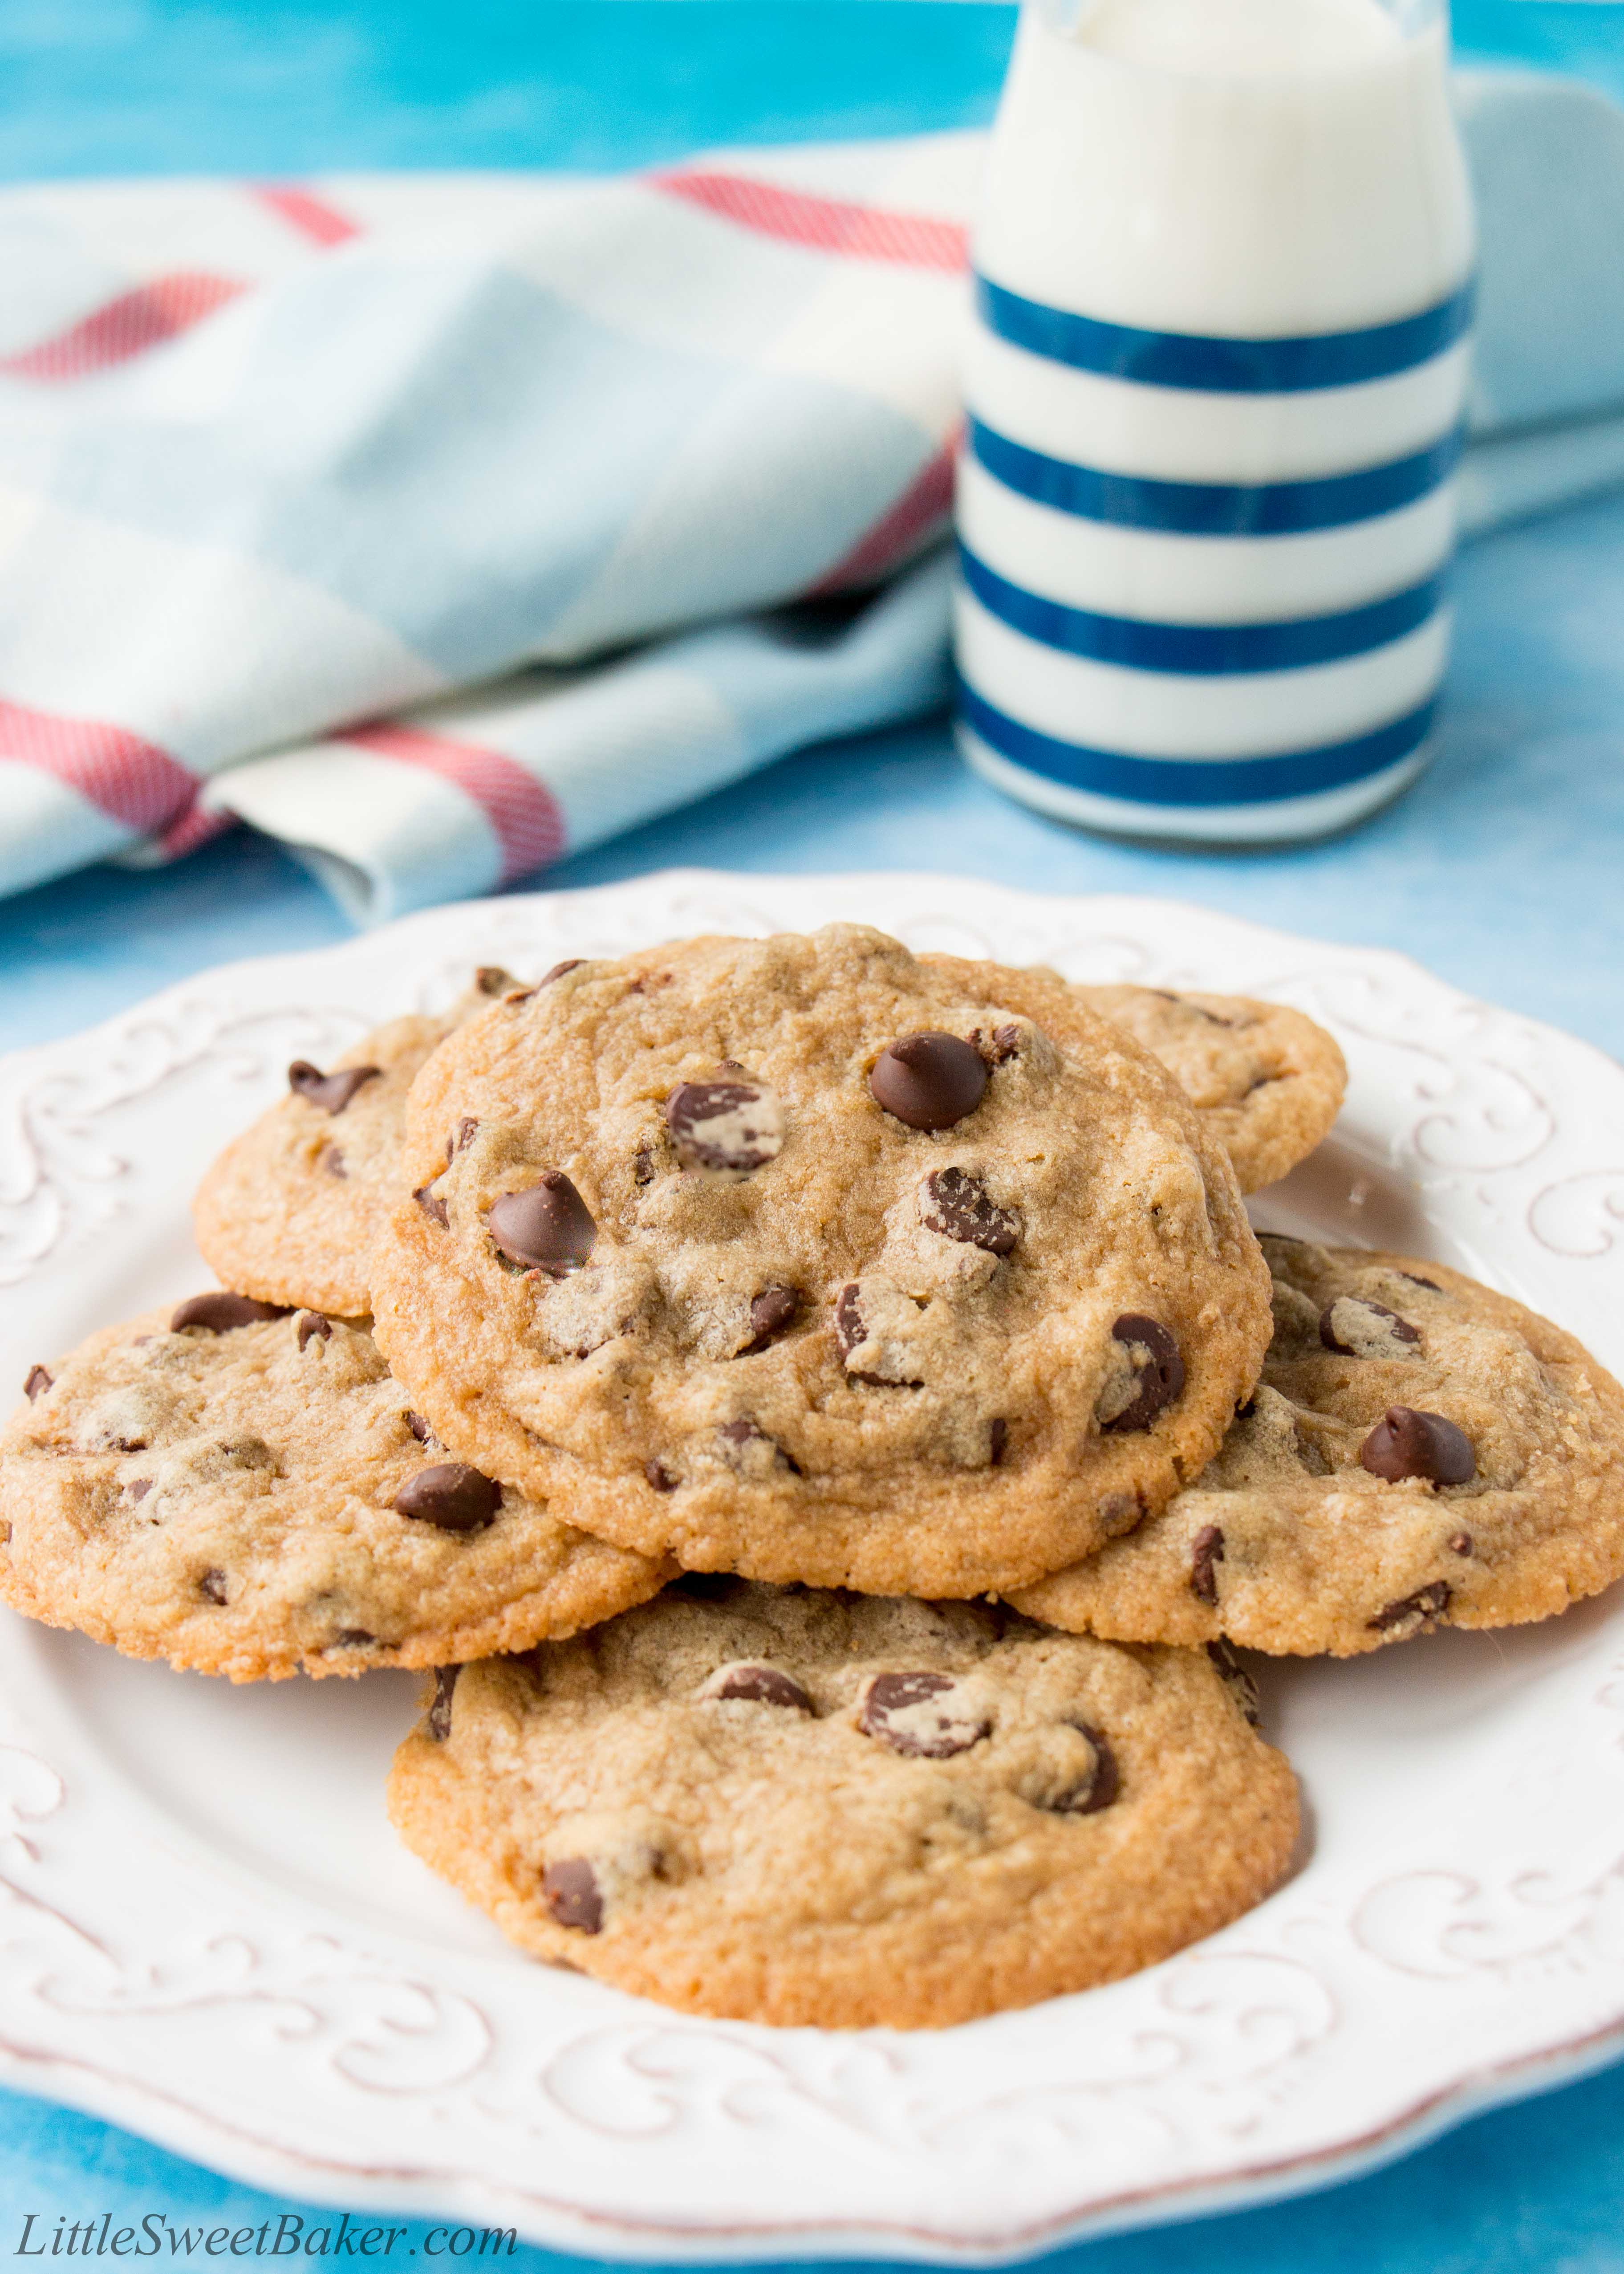 Basic Chocolate Chip Cookies Recipe With Video